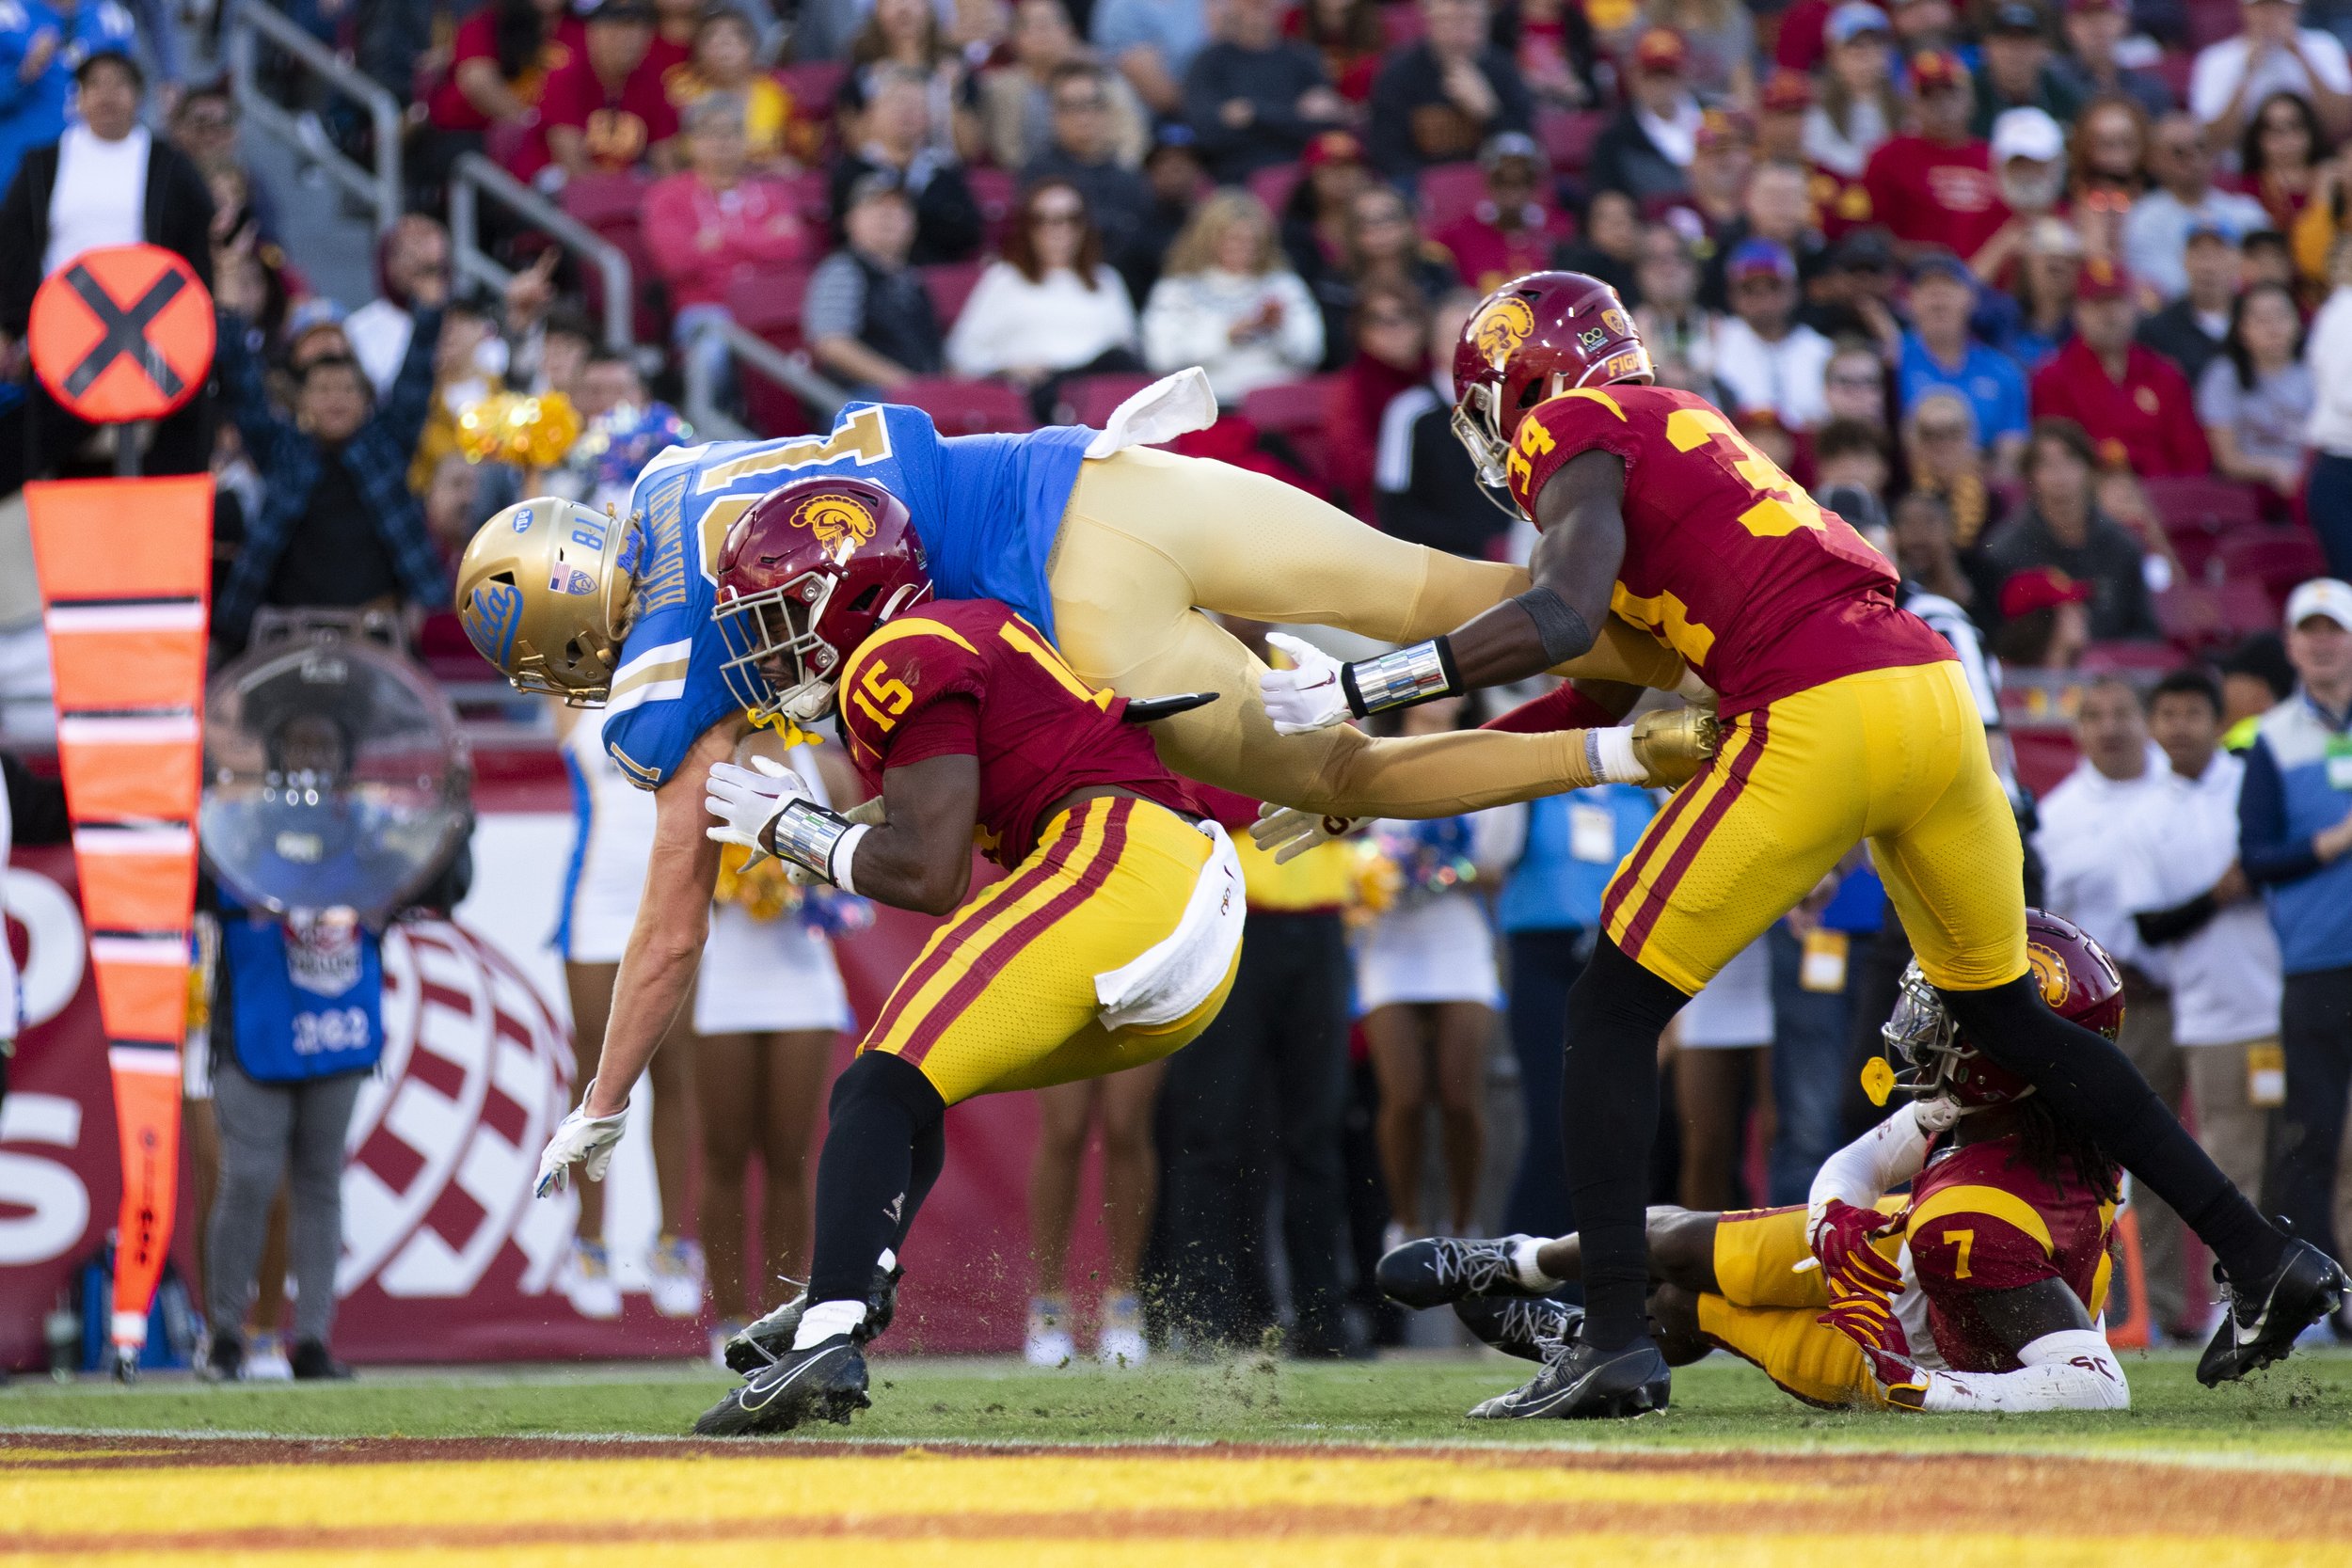  University of California, Los Angeles (UCLA) Bruin tight end Hudson Habermehl (left) being tackled into the end zone by University of Southern California (USC) Trojan safety Anthony Beavers Jr. (center) and rush end Braylan Shelby (right) during the